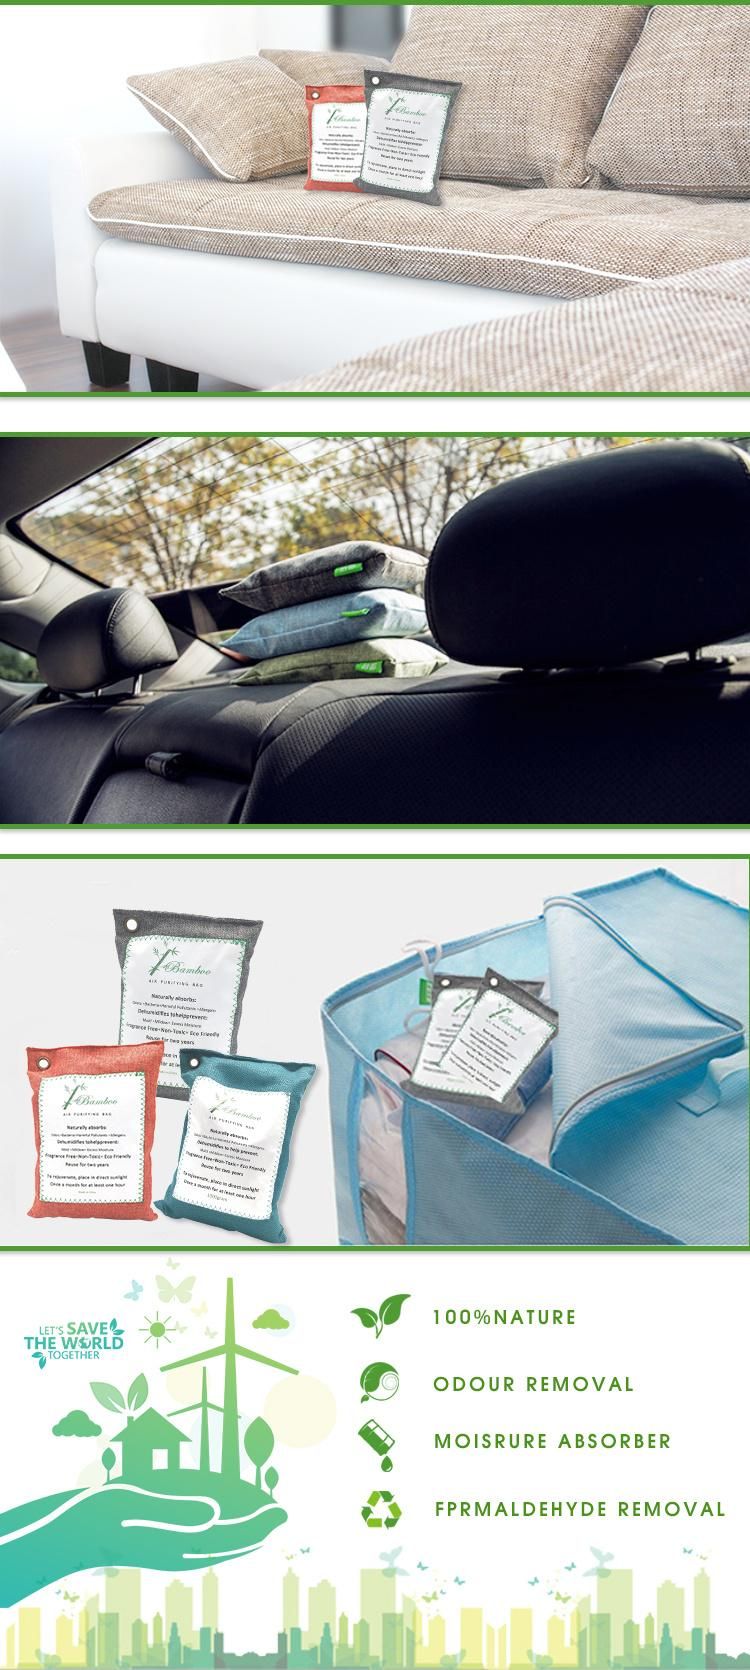 Activated Bamboo Charcoal Bag Shoe Deodorizer Car Air Purifiers